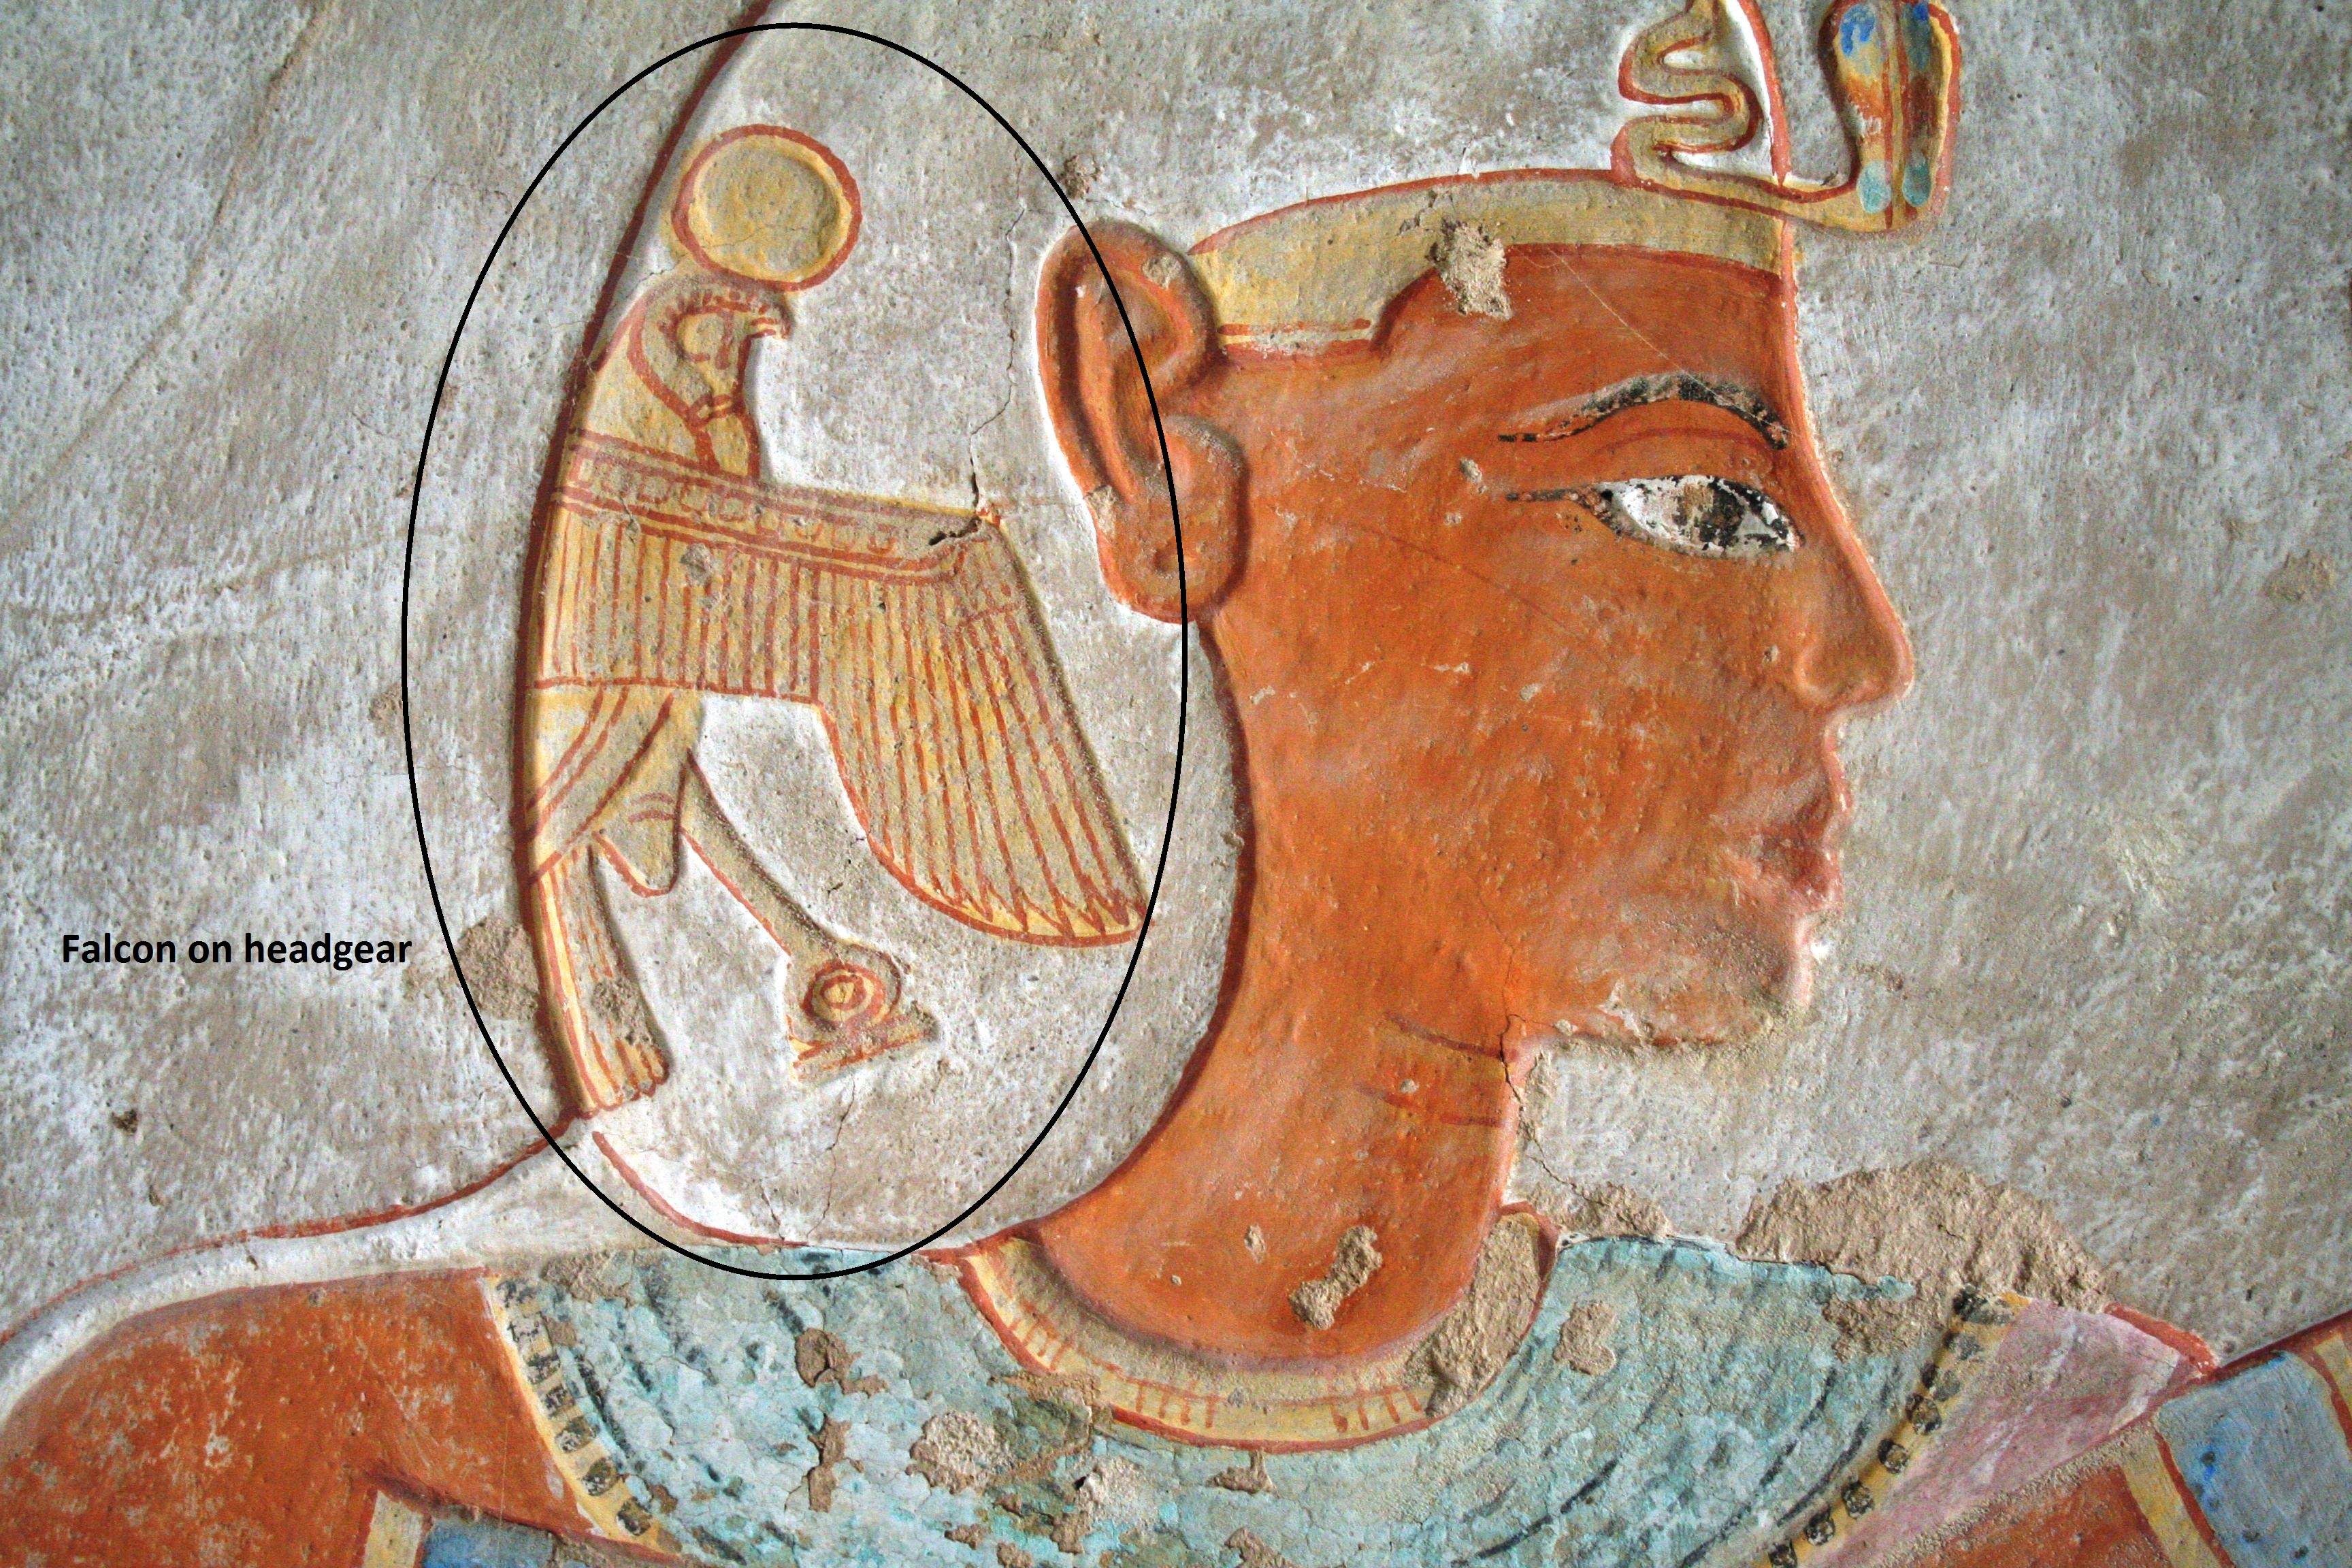 Variable of the Day, Ancient Egypt: Falcon on headgear